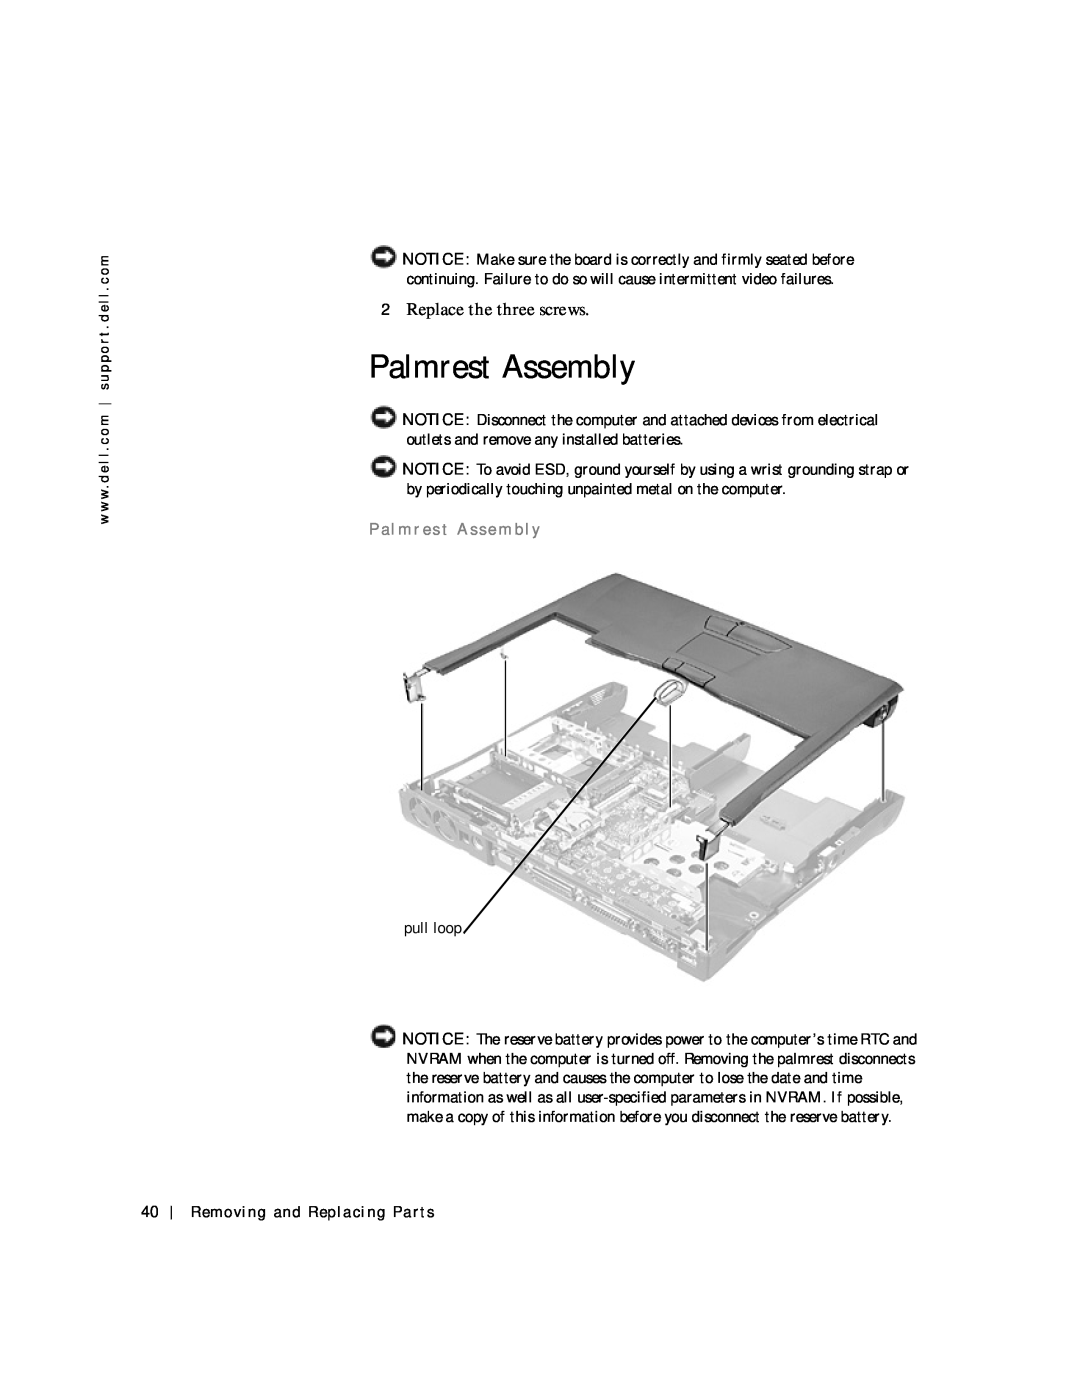 Applied Energy Products C800 service manual Palmrest Assembly, Replace the three screws, P al m r es t A sse m bl y 